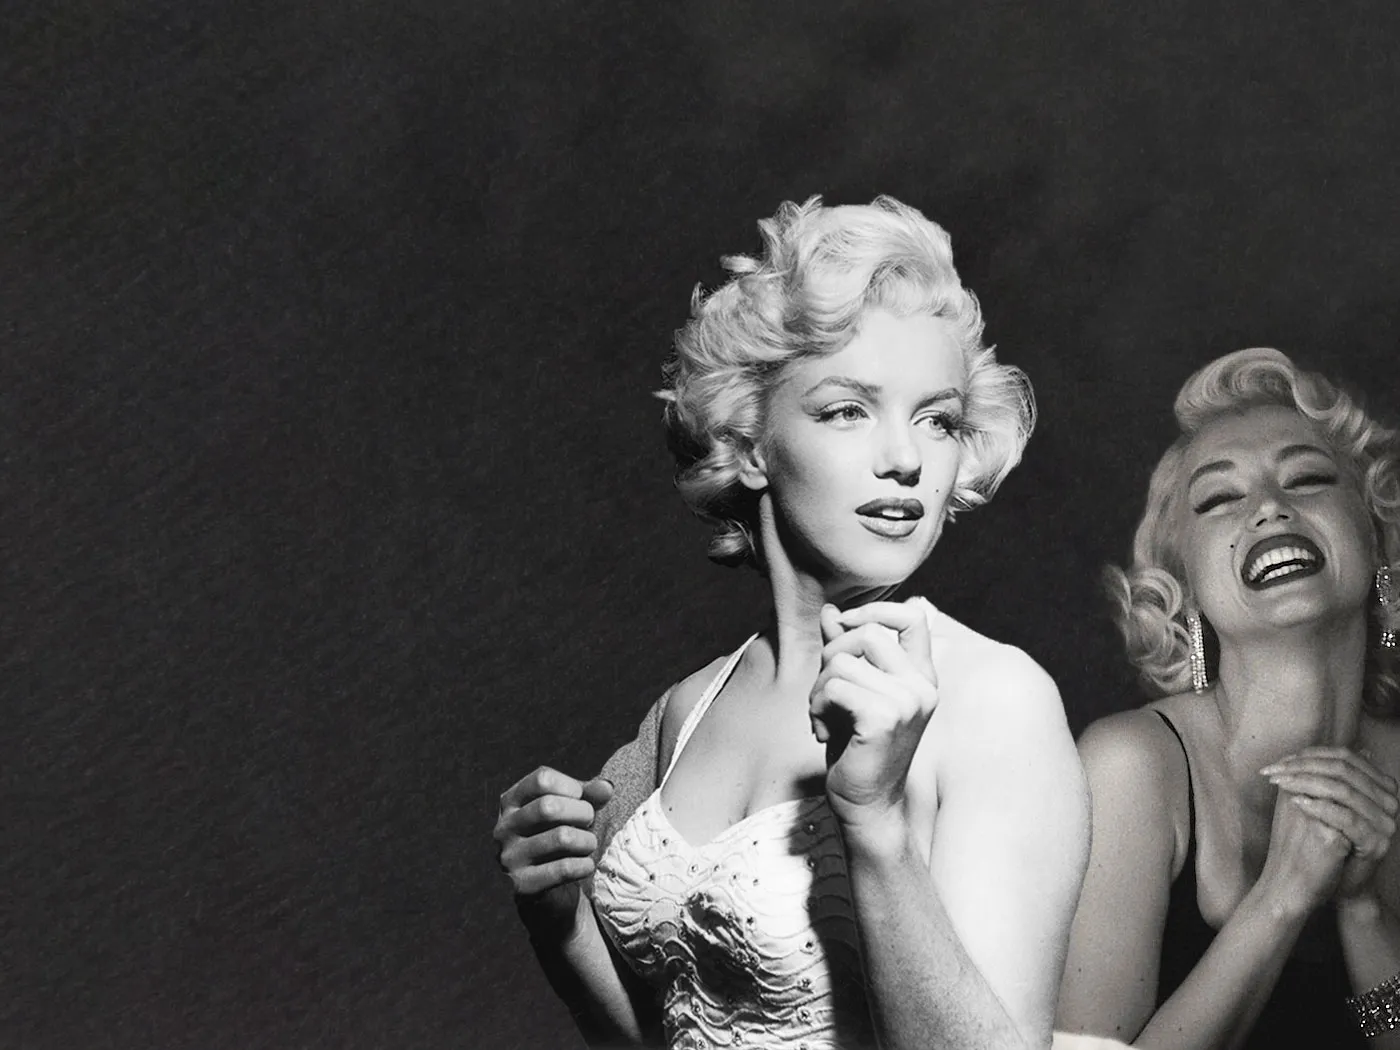 alex roig recommends did marilyn monroe ever pose nude pic